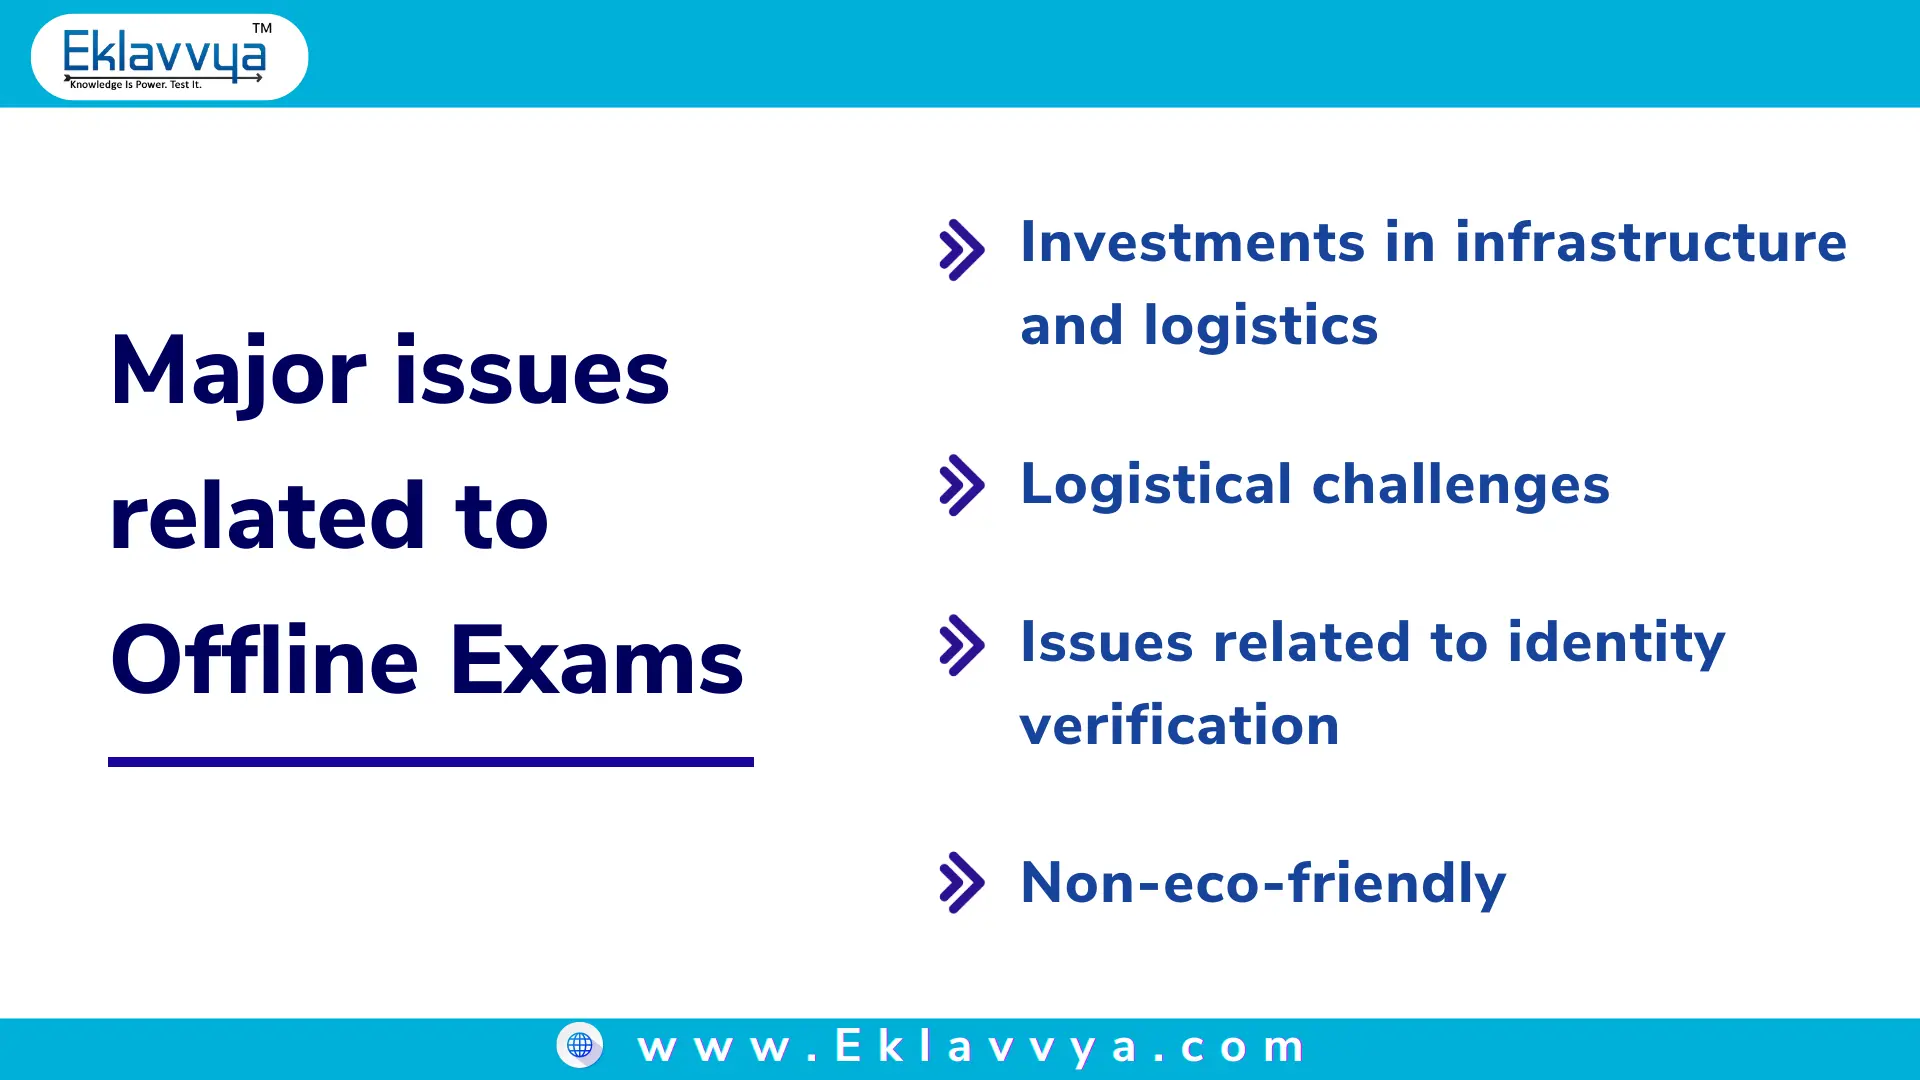 Major issues related to Offline Exams